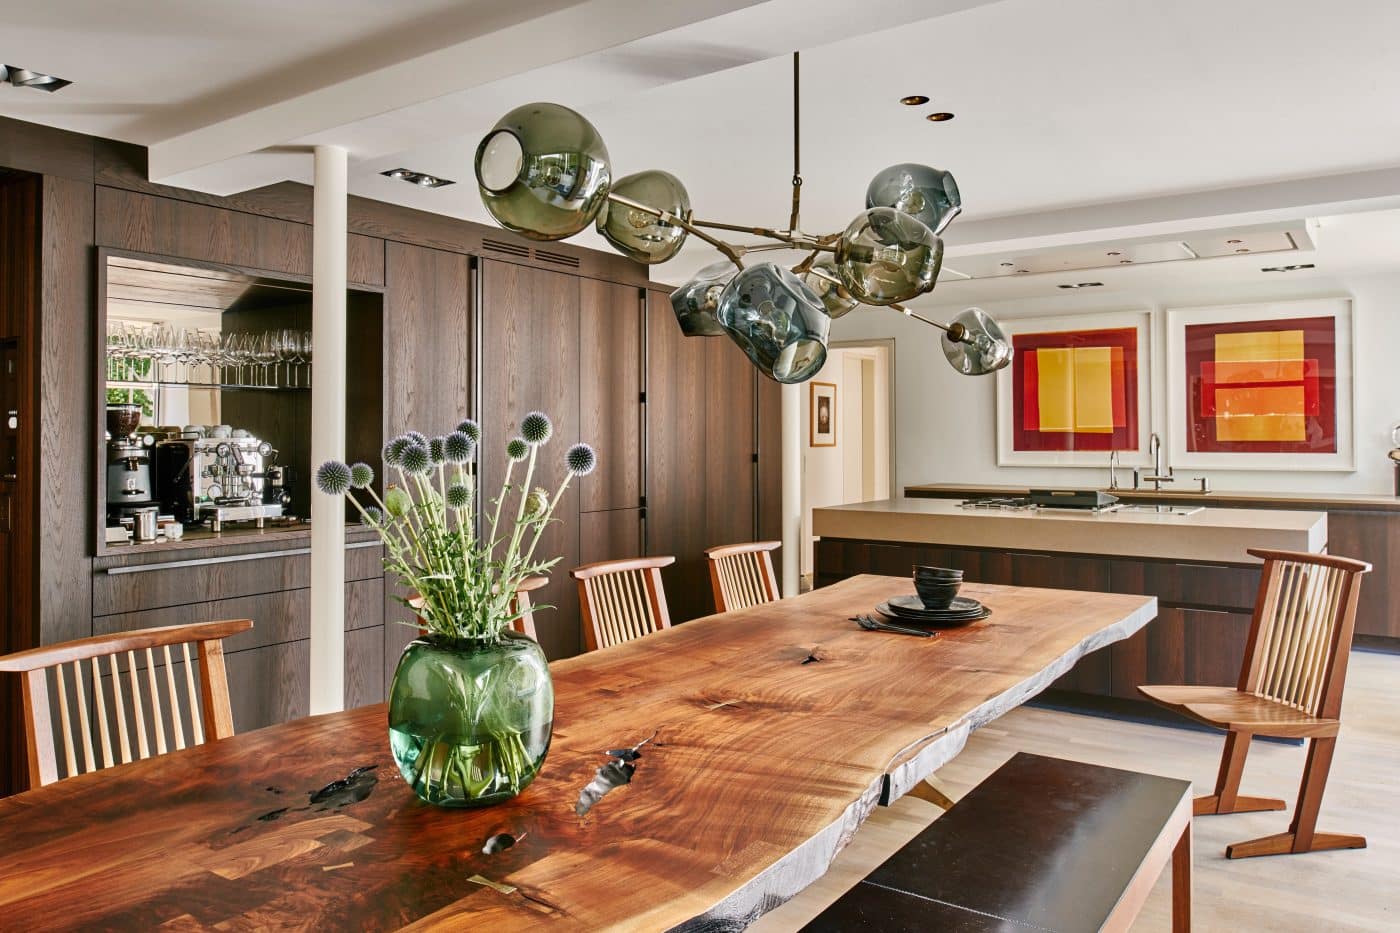 dining area in Munich home by interior designer Robert Stephan with chairs by George Nakashima at a live-edge walnut-slab plank table and bench by BDDW